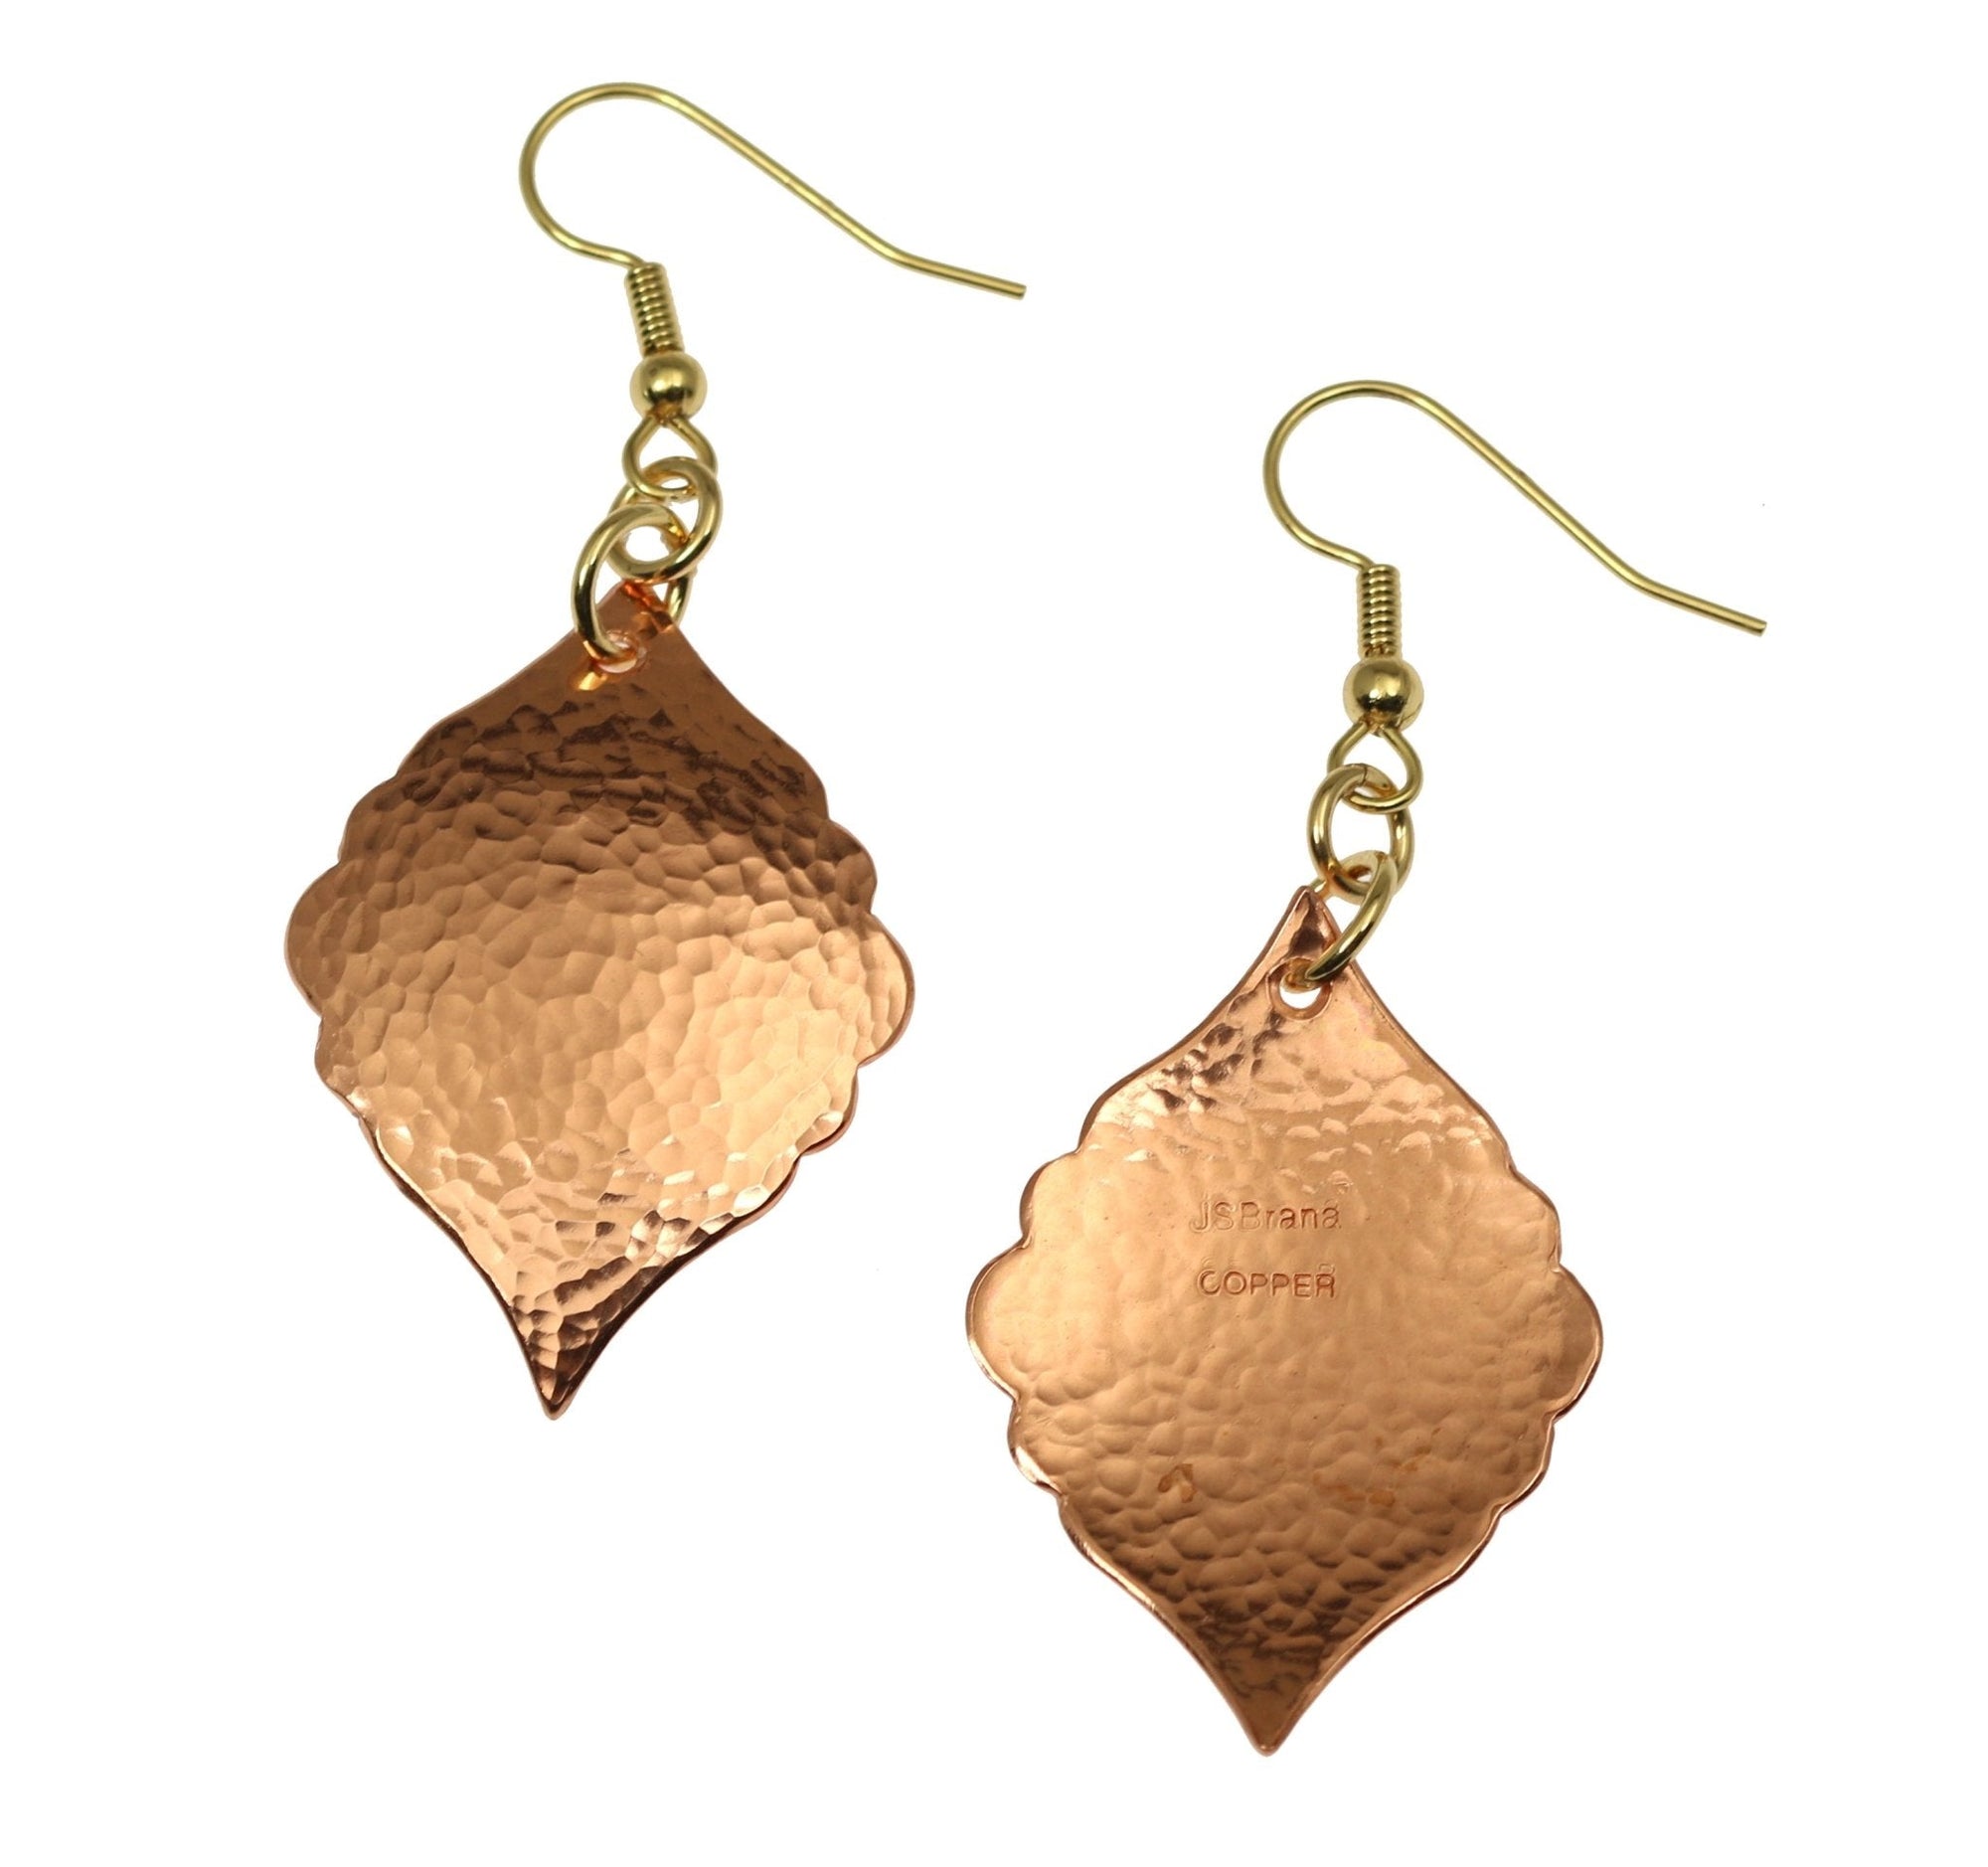 Detail View of Hammered Copper Moroccan Drop Earrings